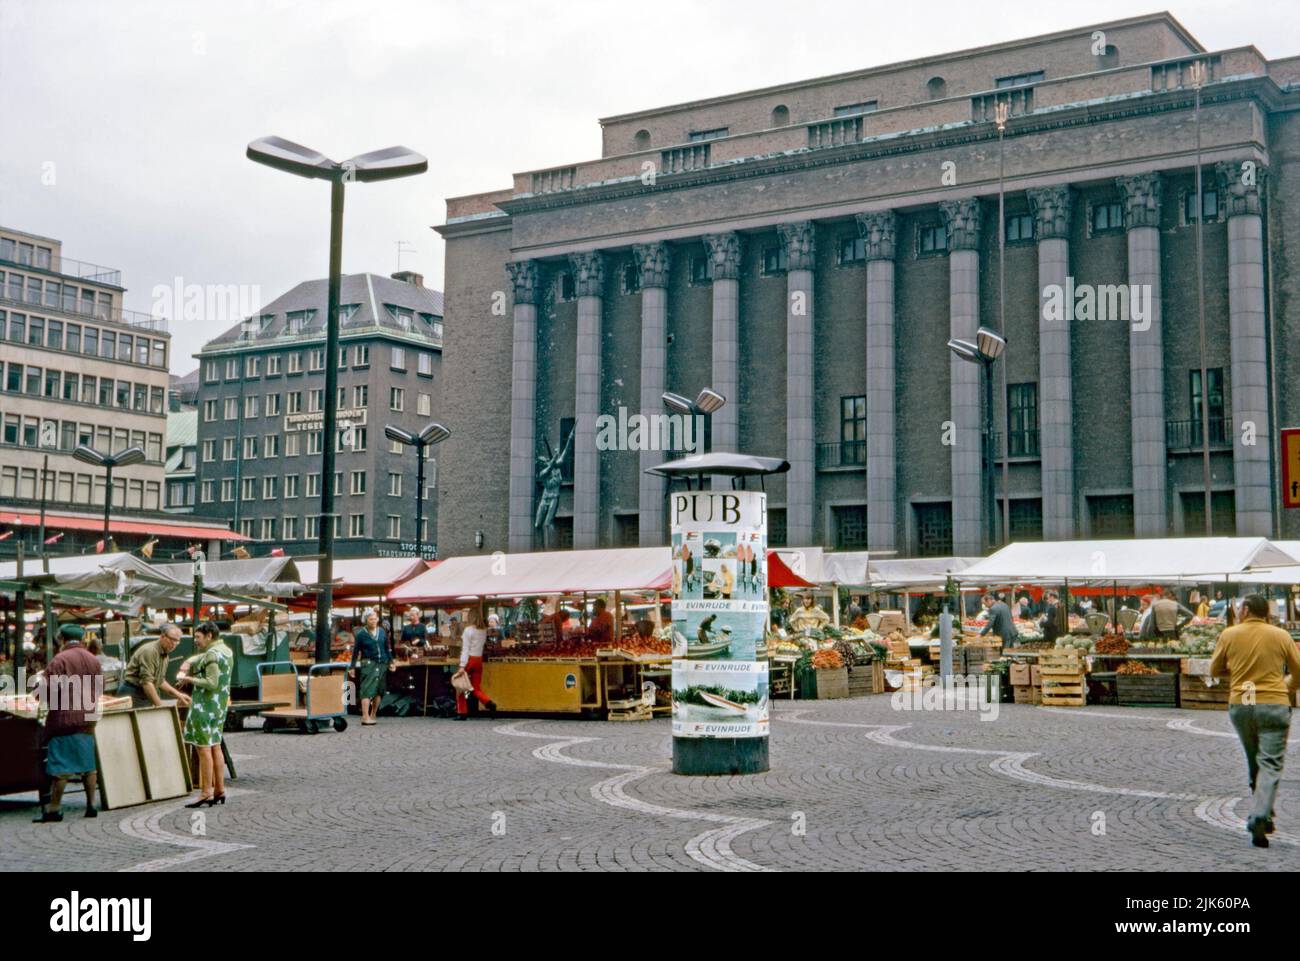 A view of the the Hötorget torghandel (market) outside the Konserthuset (Consert House) in the central Norrmalm district, Stockholm, Sweden in 1970. Norrmalm is at centre of Stockholm. In the 1950s and 1960s, large parts of lower Norrmalm were torn down to build a new and modern city. This image is from an amateur 35mm colour transparency – a vintage 1970s photograph. Stock Photo